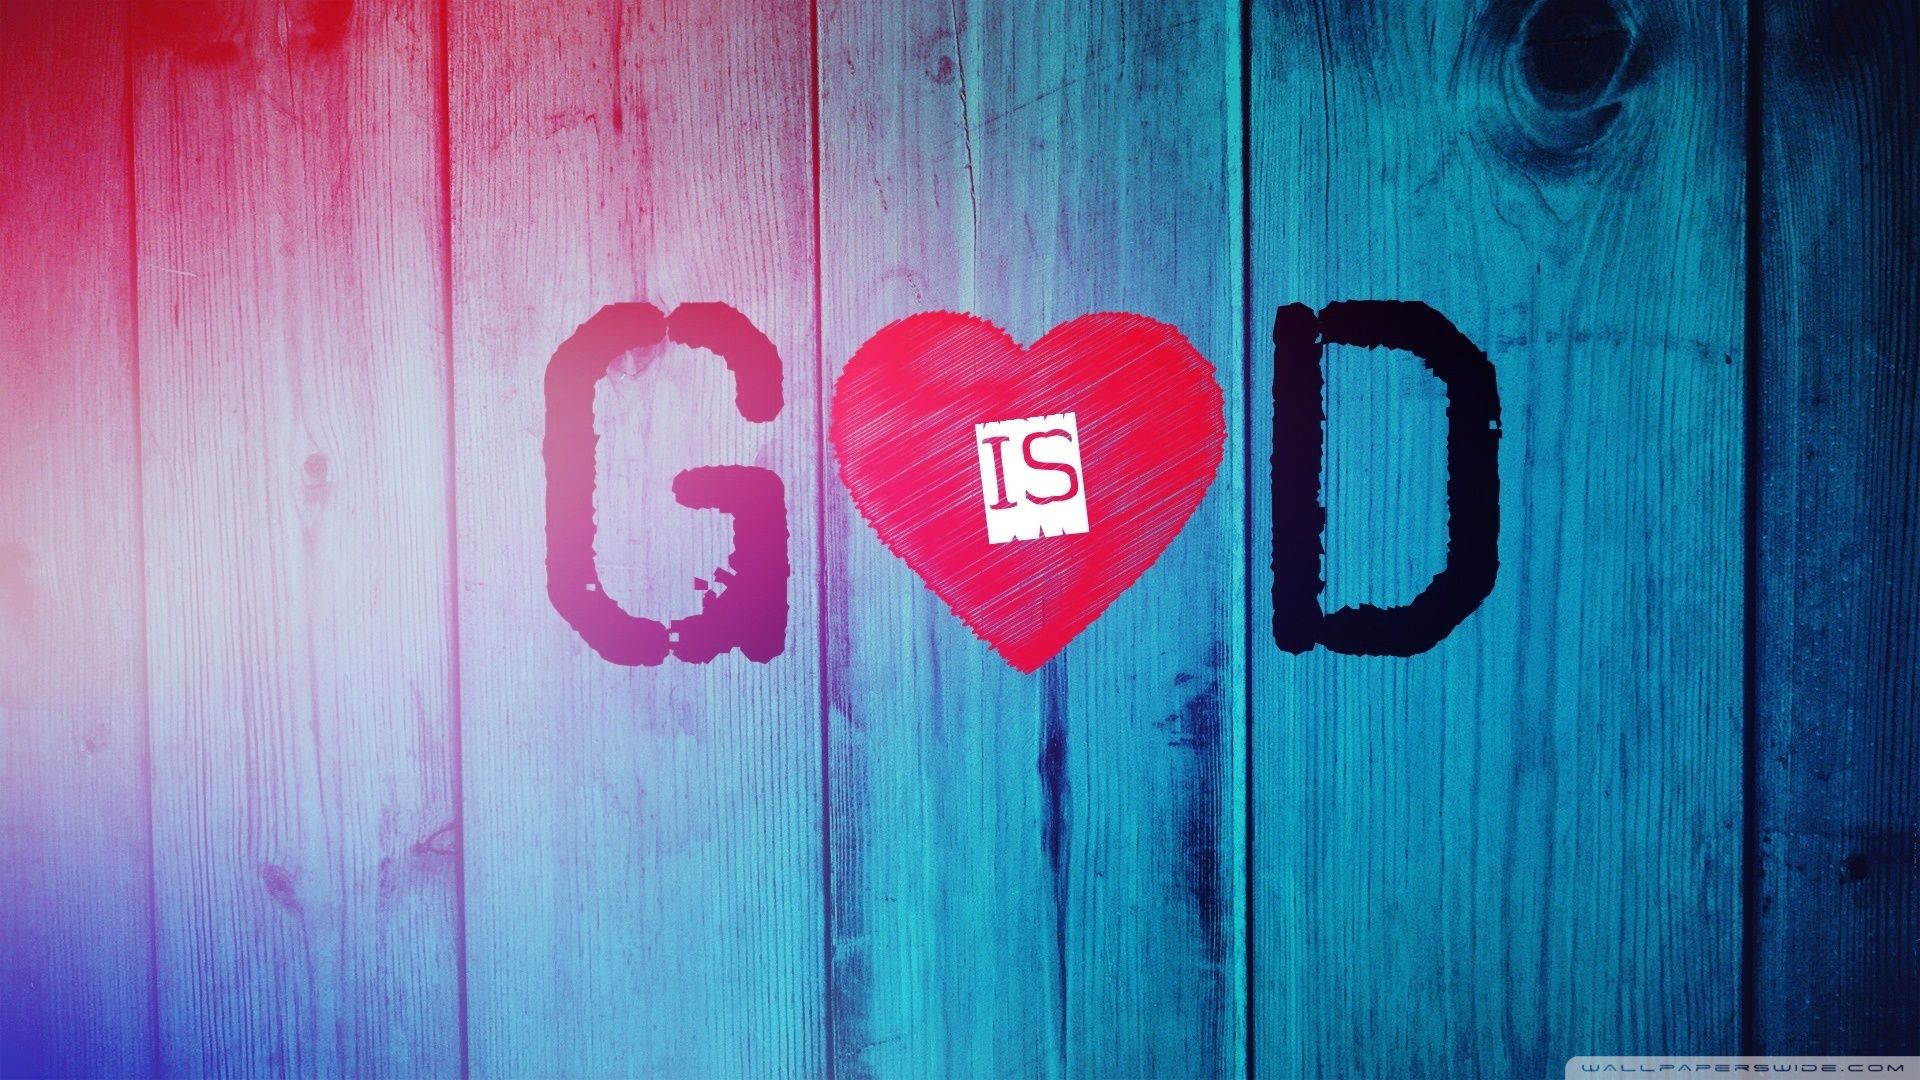 Beautiful Spiritual Love For God Hd Wallpapers For Your Desktop PC